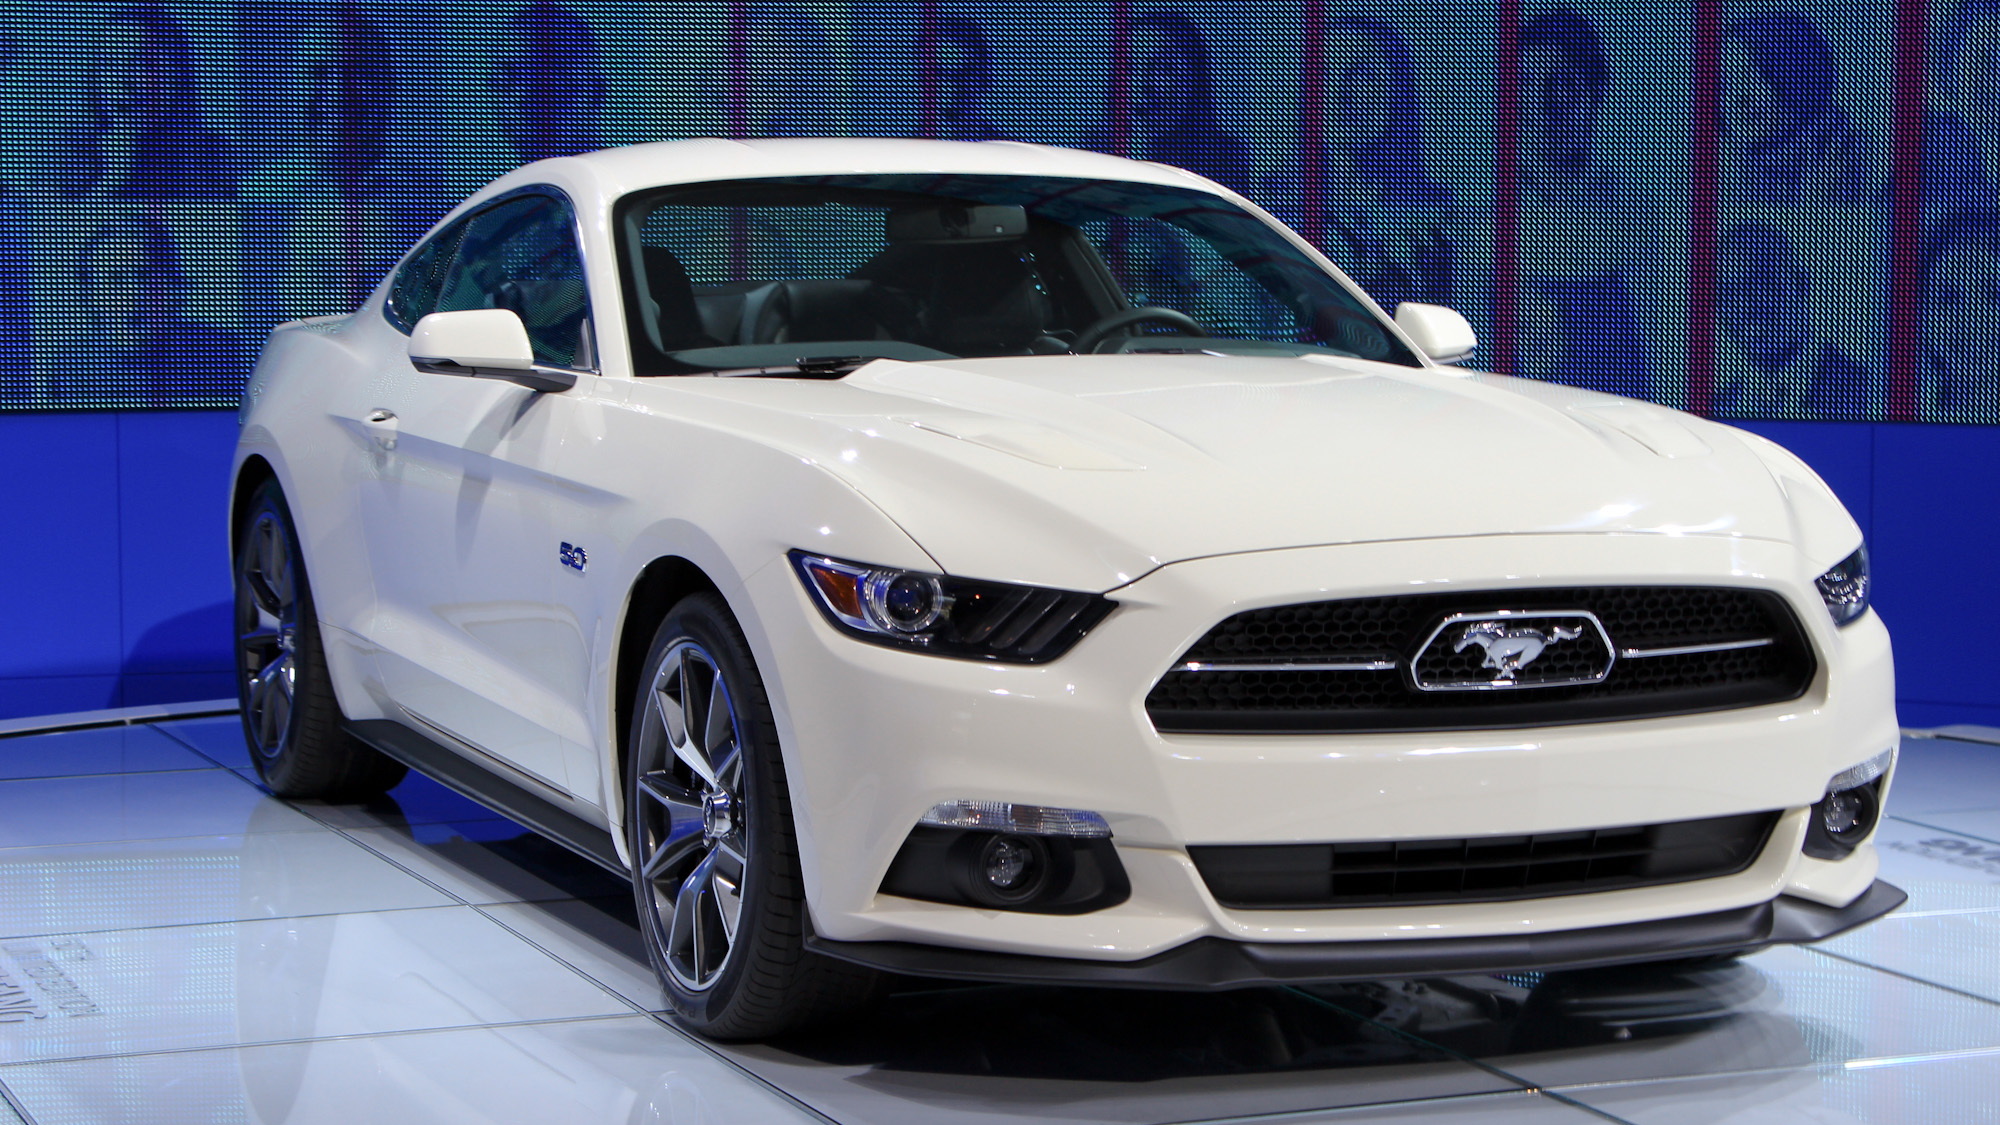 2015 Ford Mustang 50 Year Limited Edition, 2014 New York Auto Show